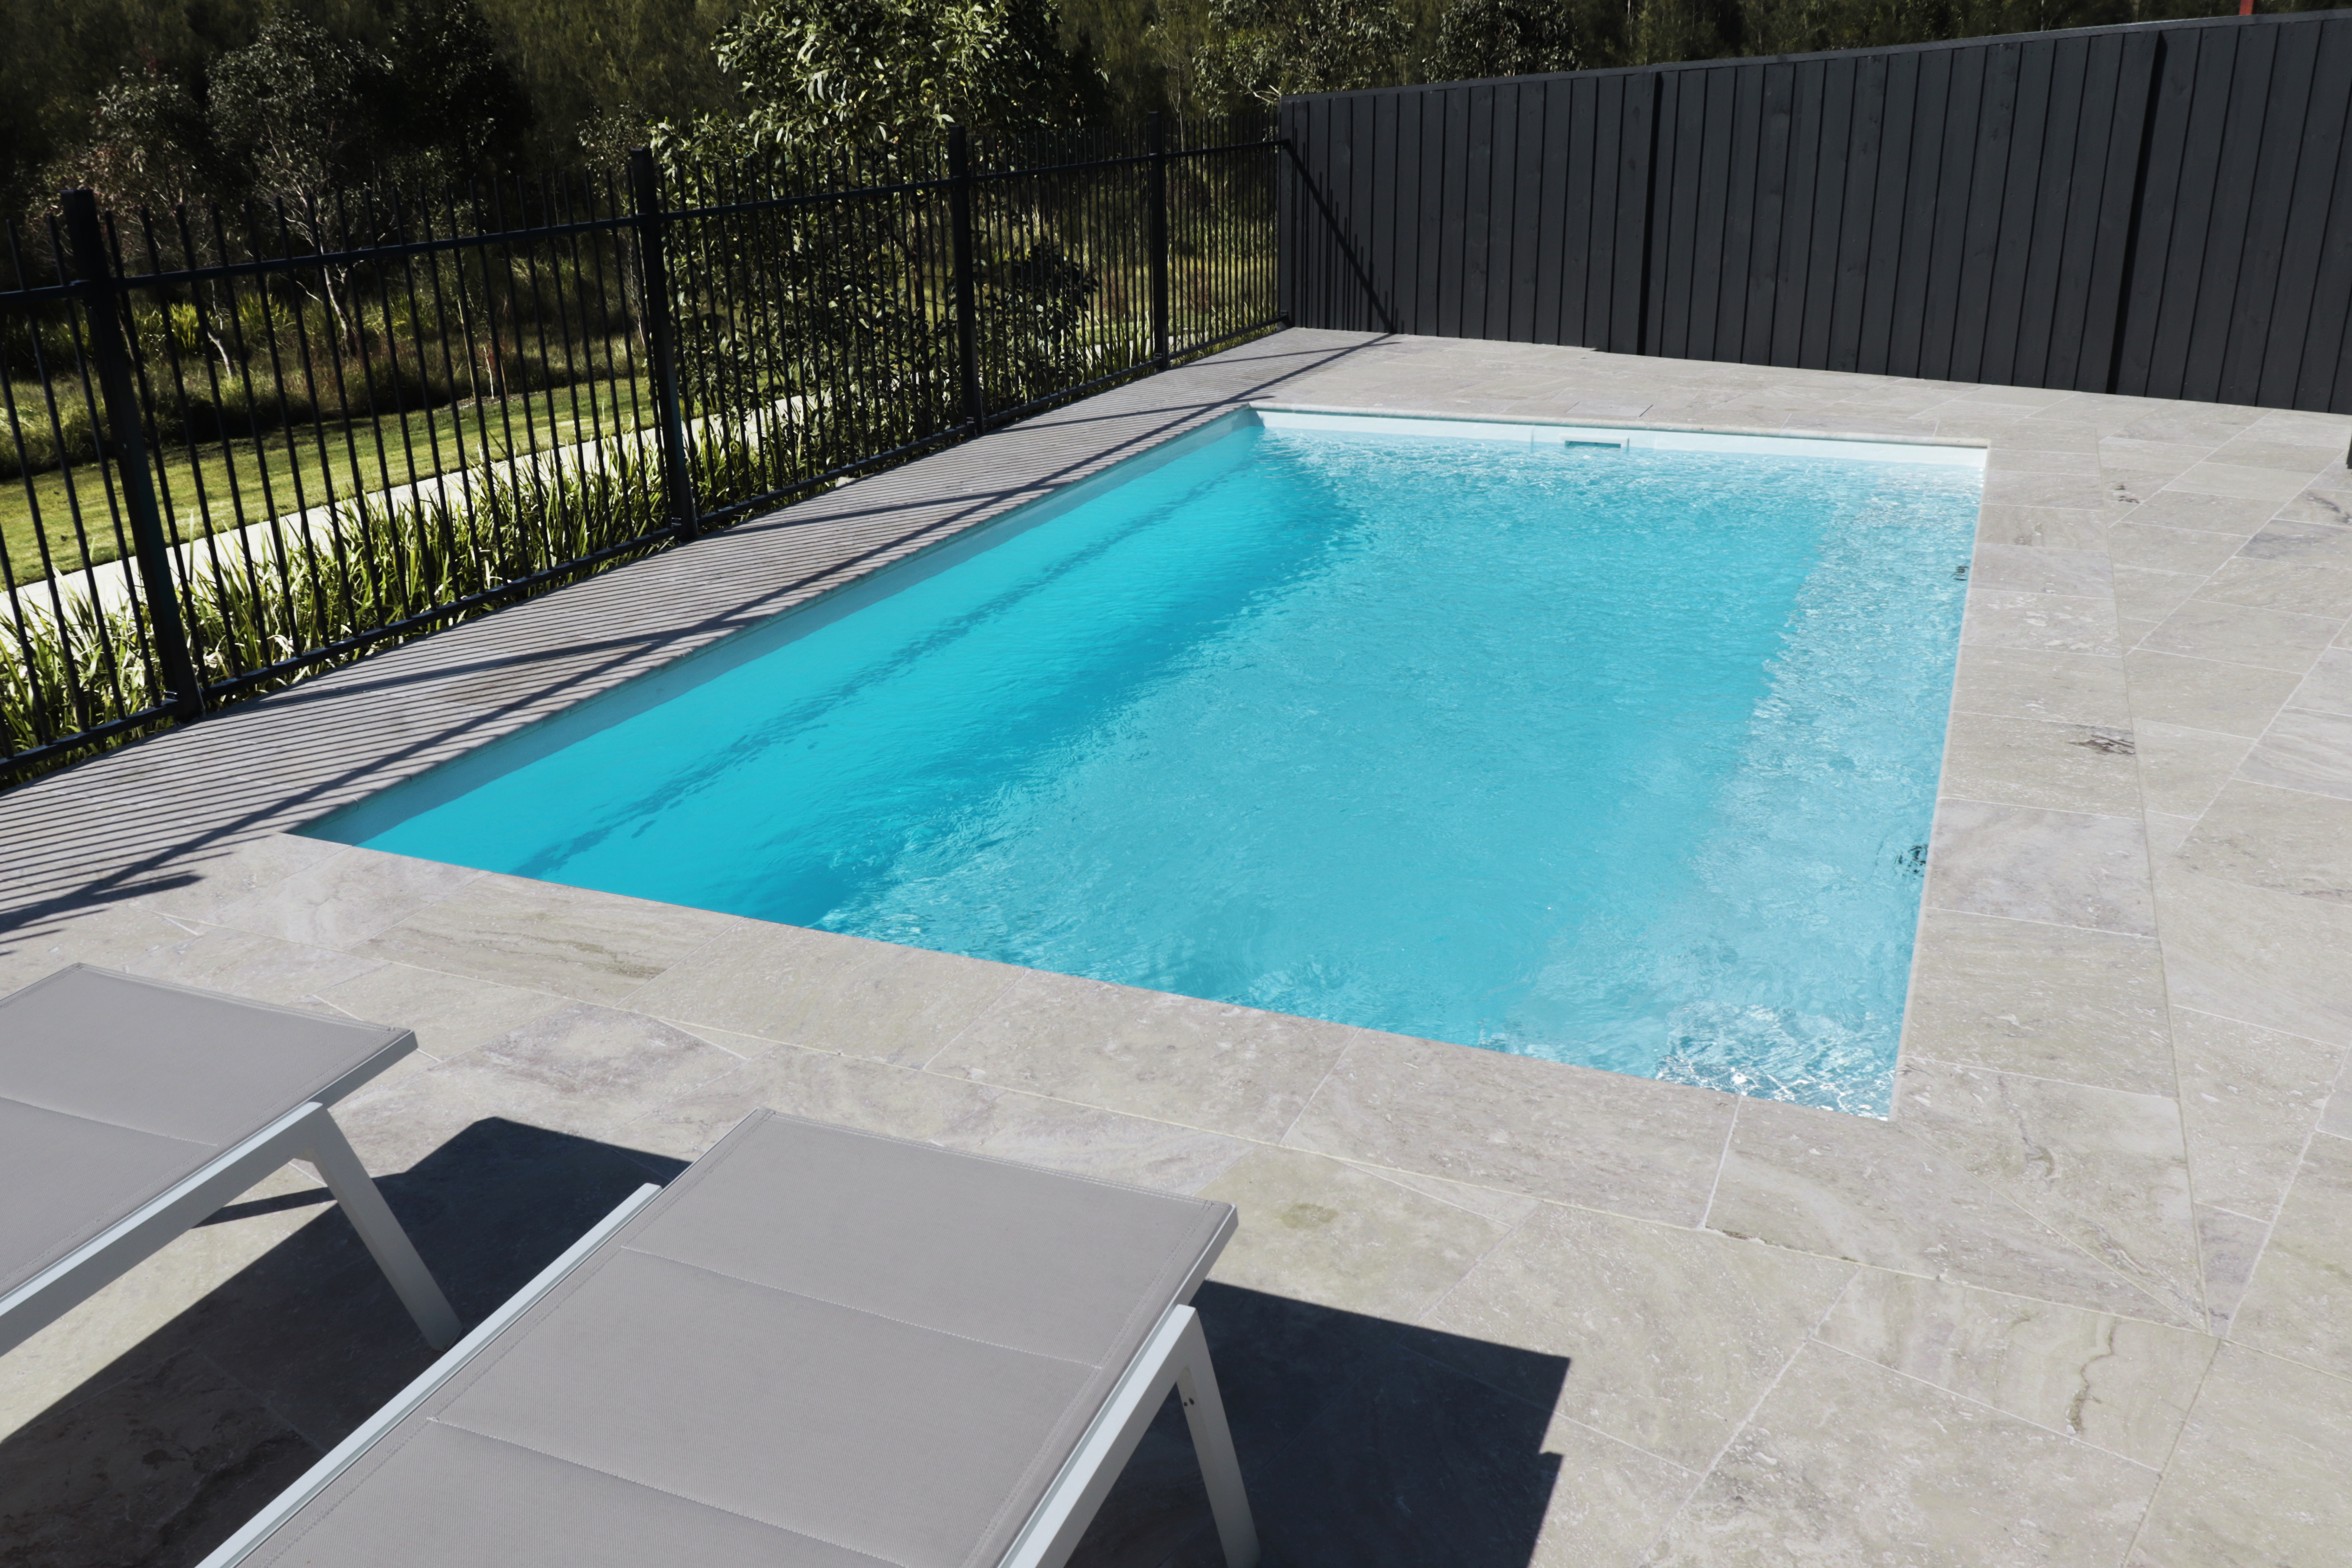 Pool Builders in Gold Coast and South Brisbane